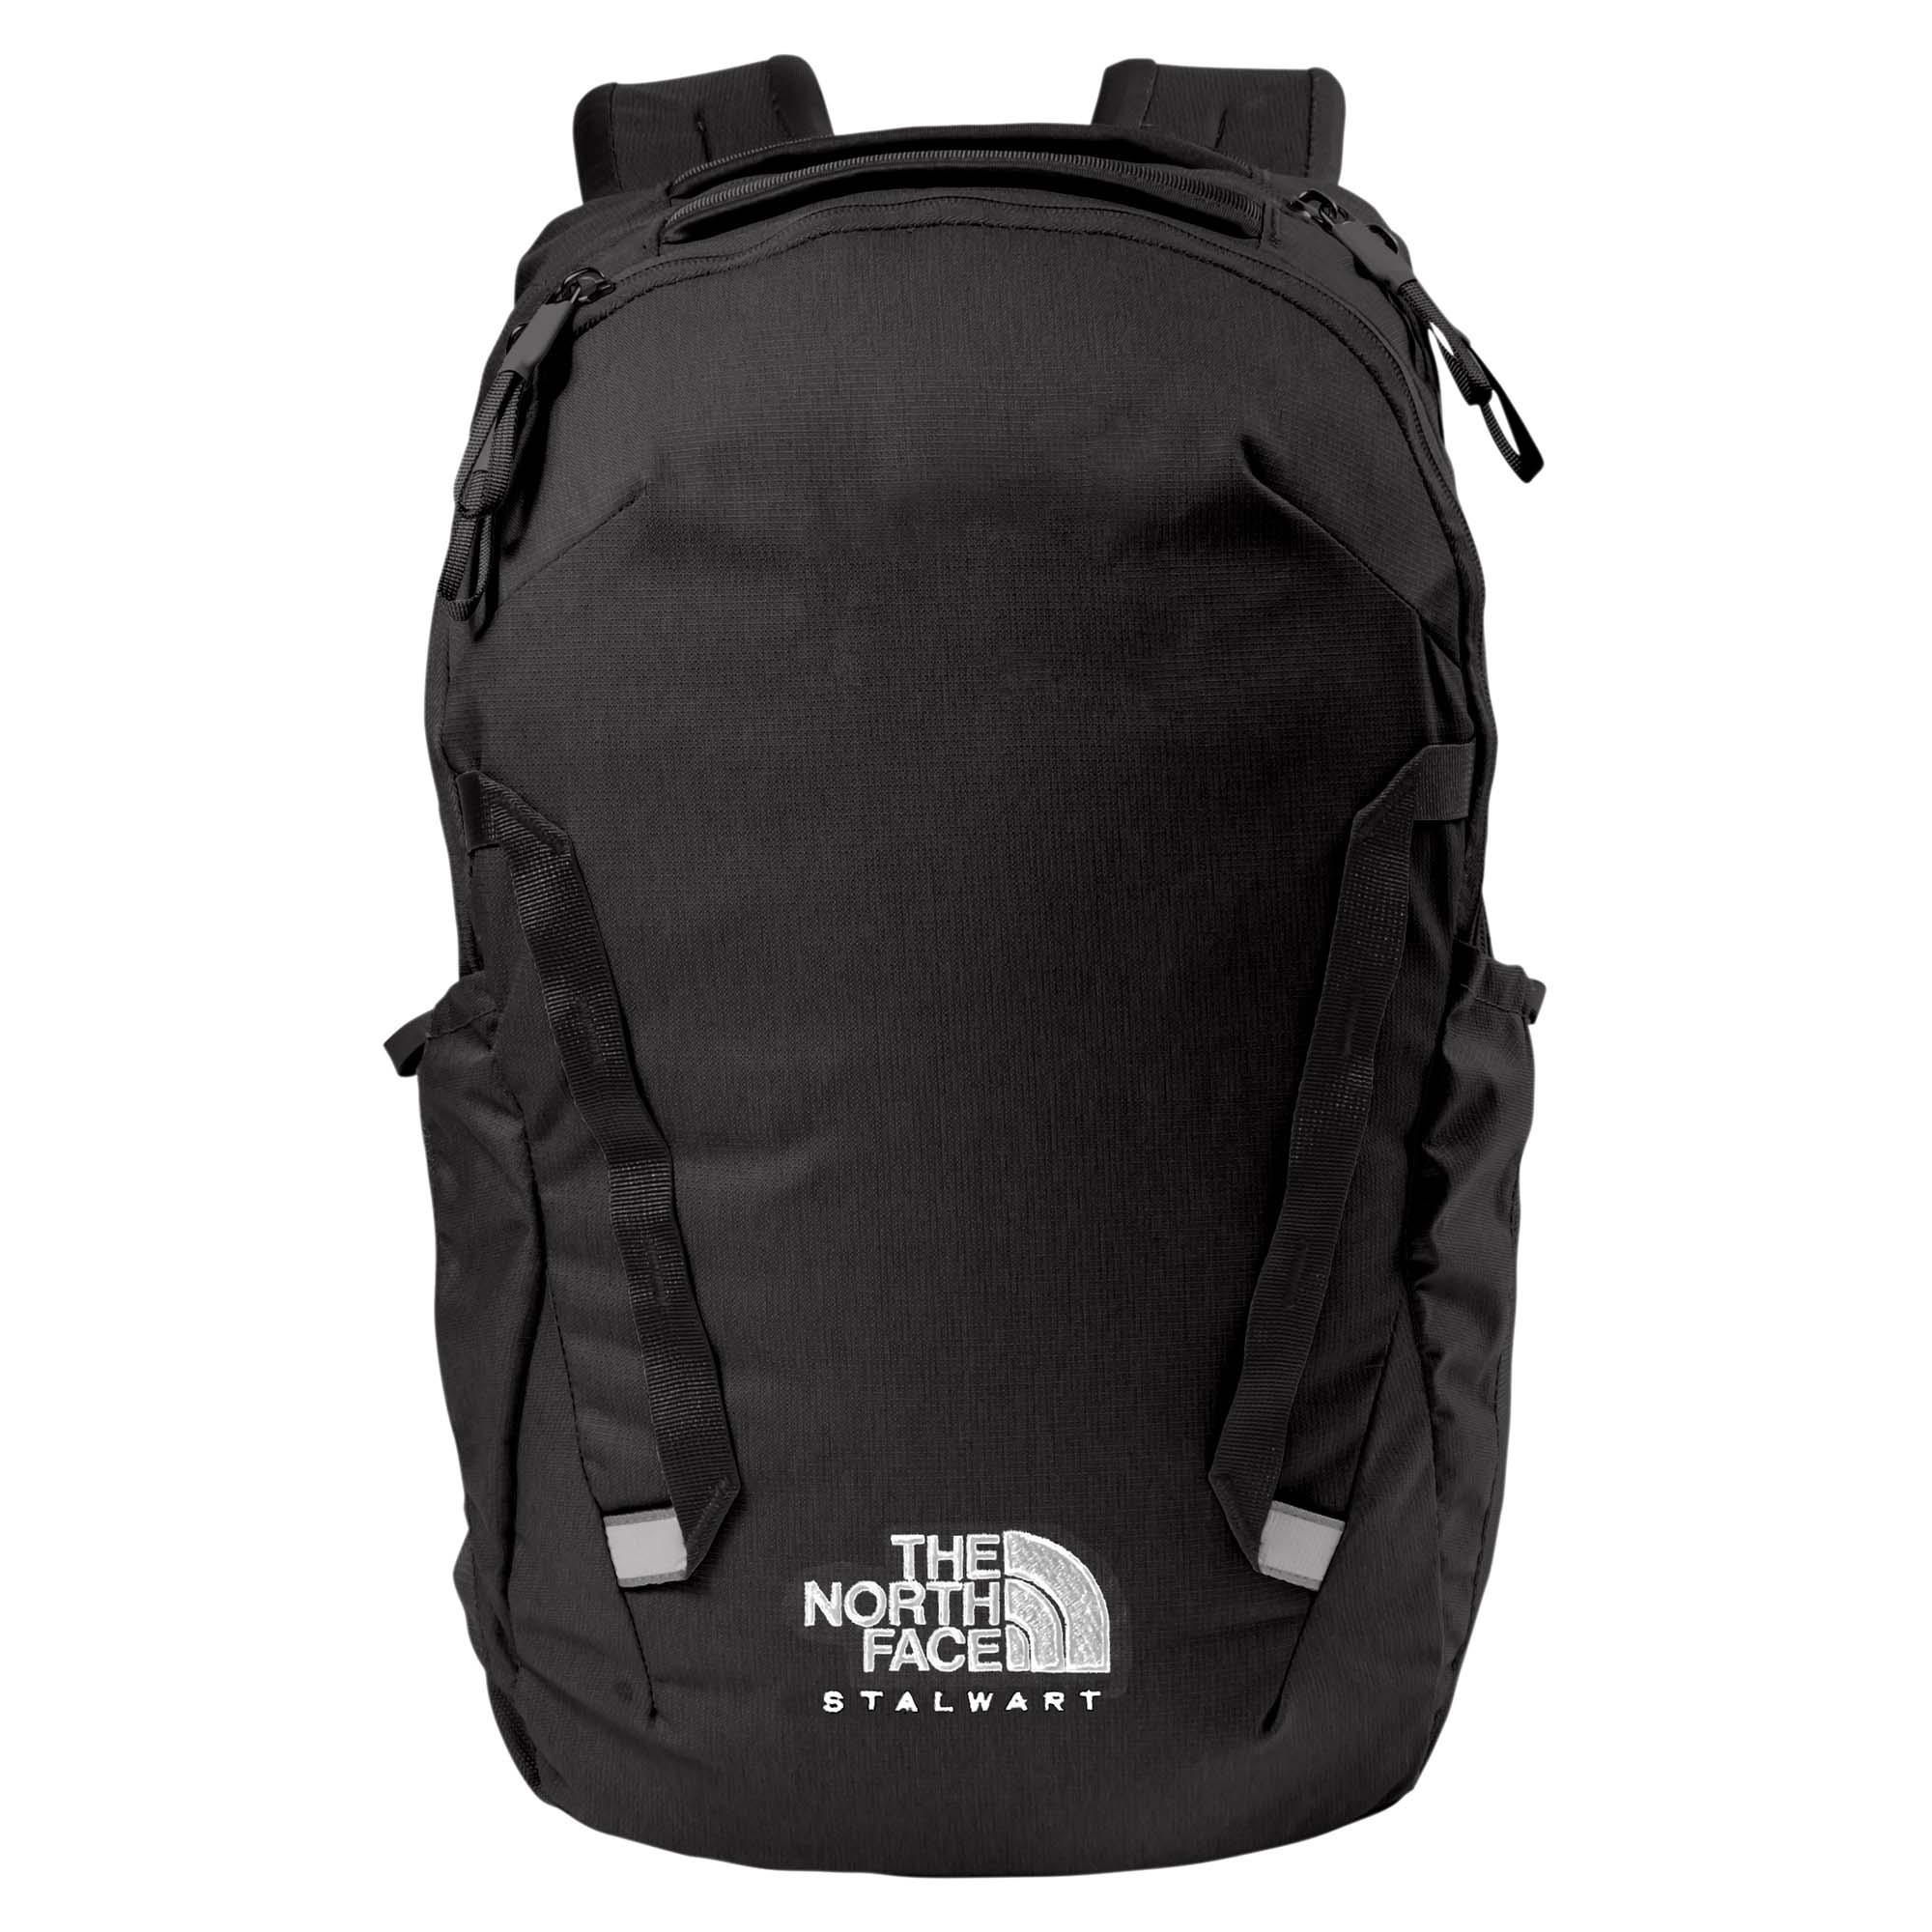 The North Face NF0A52S6 Stalwart Backpack - TNF Black | Full Source